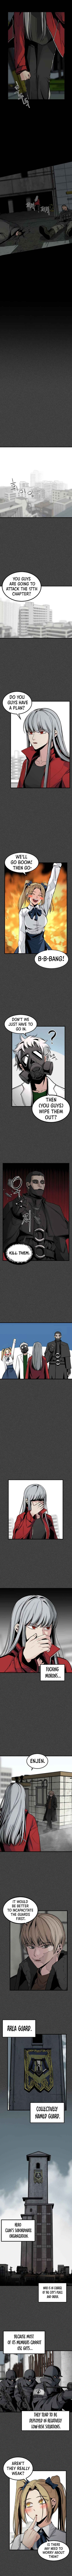 Hero Killer Chapter 9 Page 3